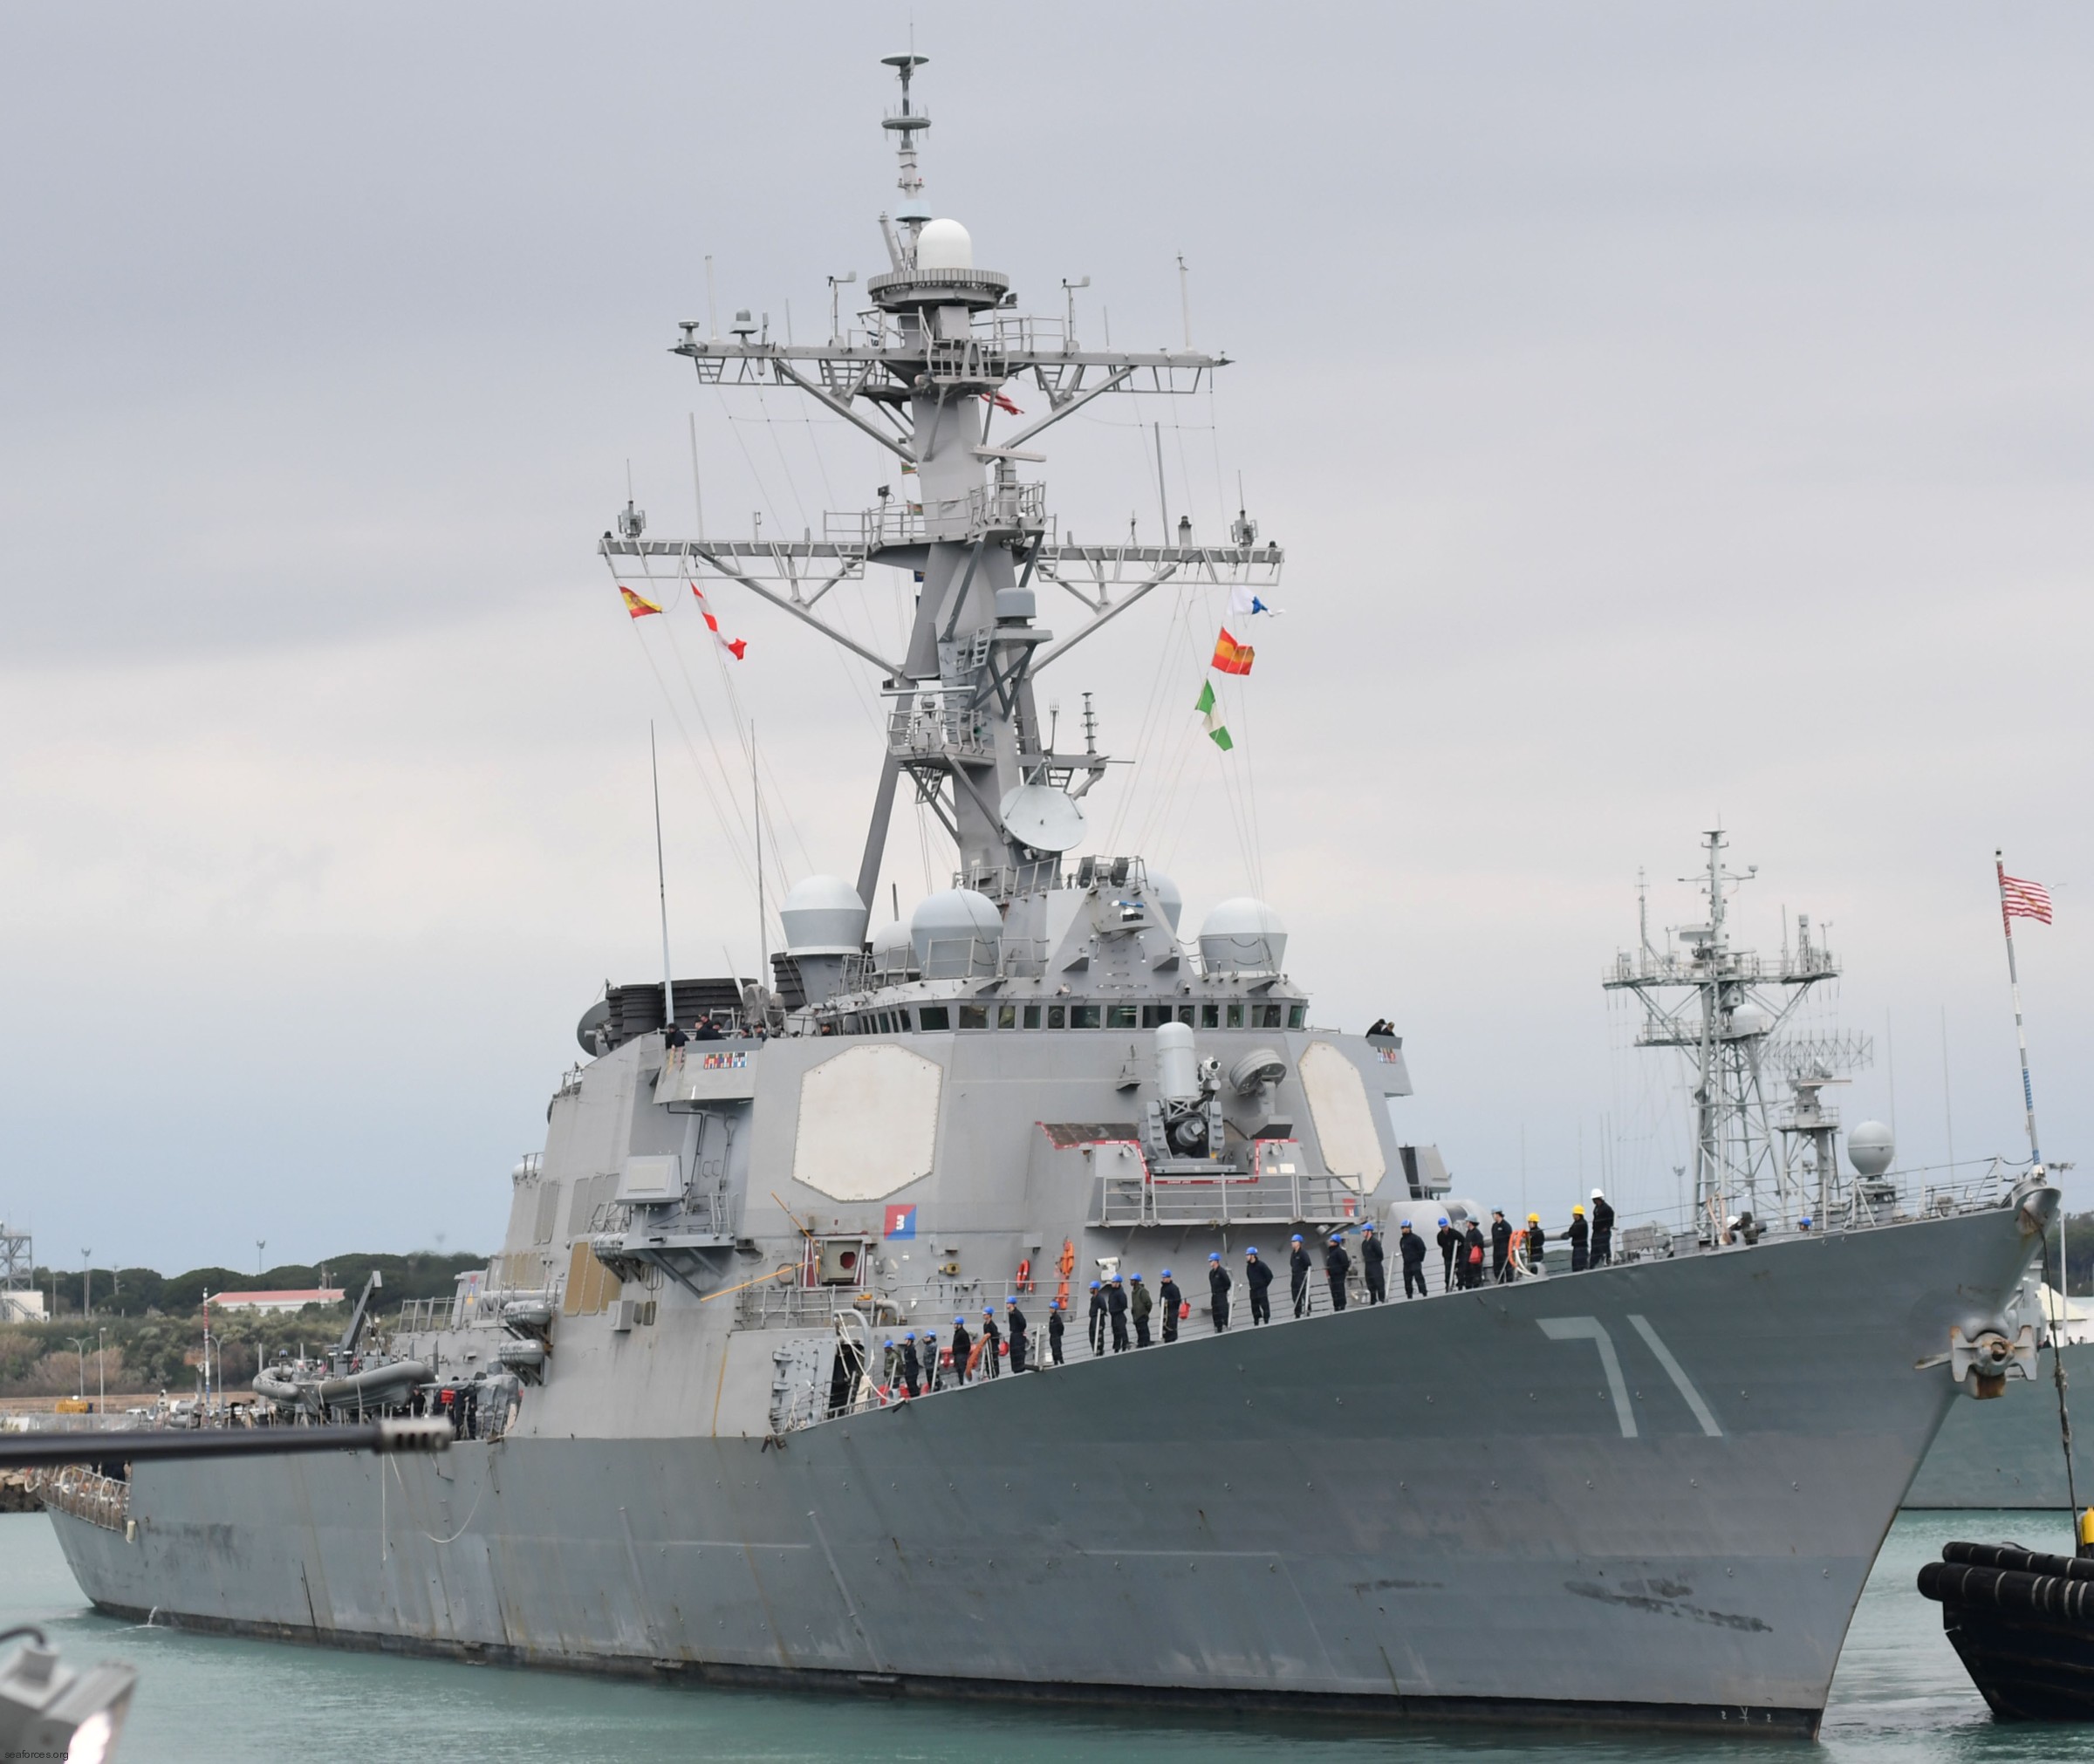 ddg-71 uss ross guided missile destroyer arleigh burke class aegis bmd 37